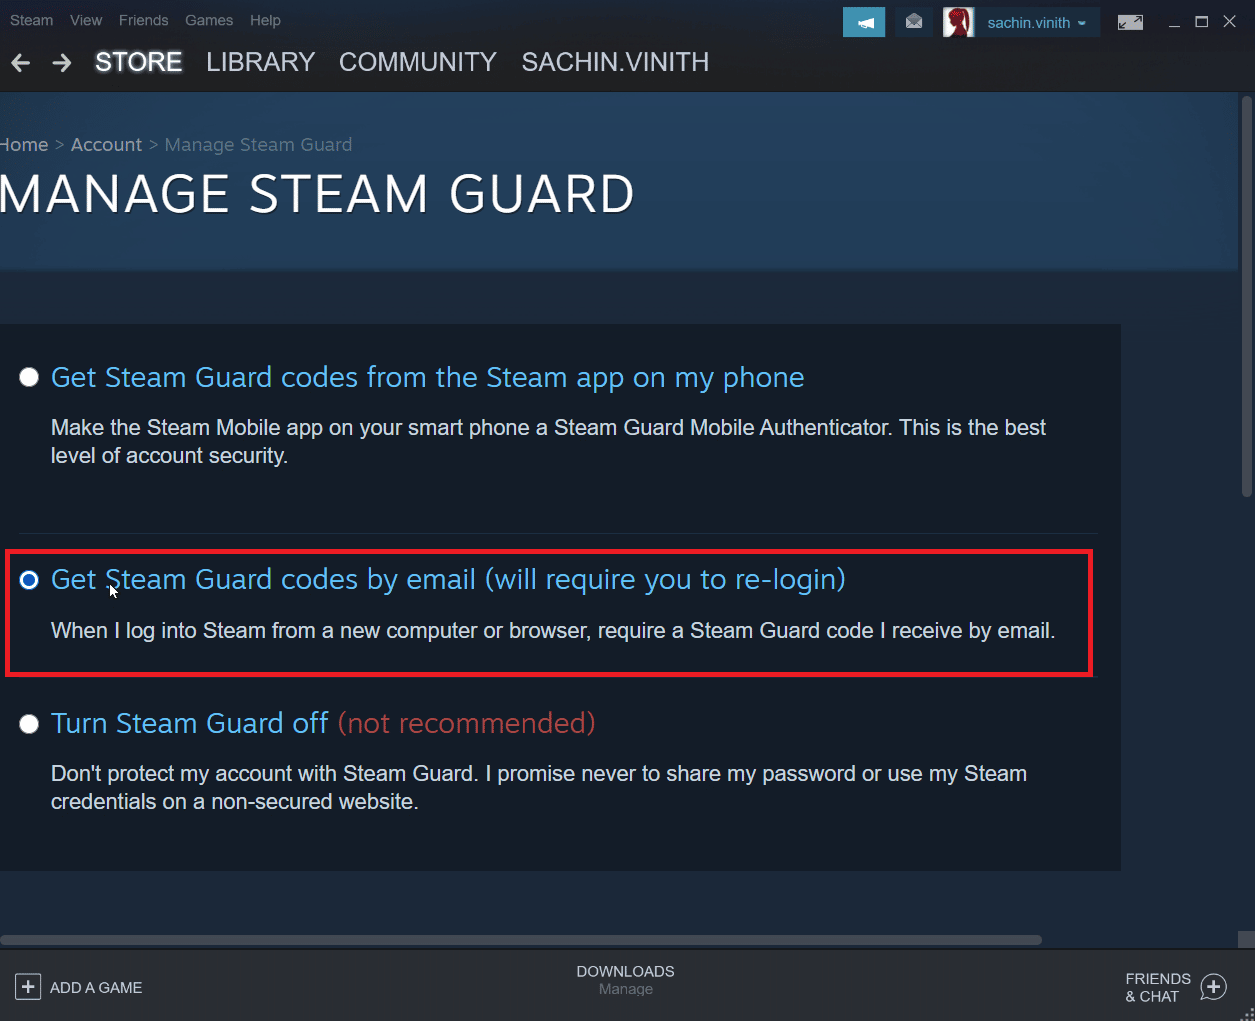 You are not currently logged in to a steam account фото 57